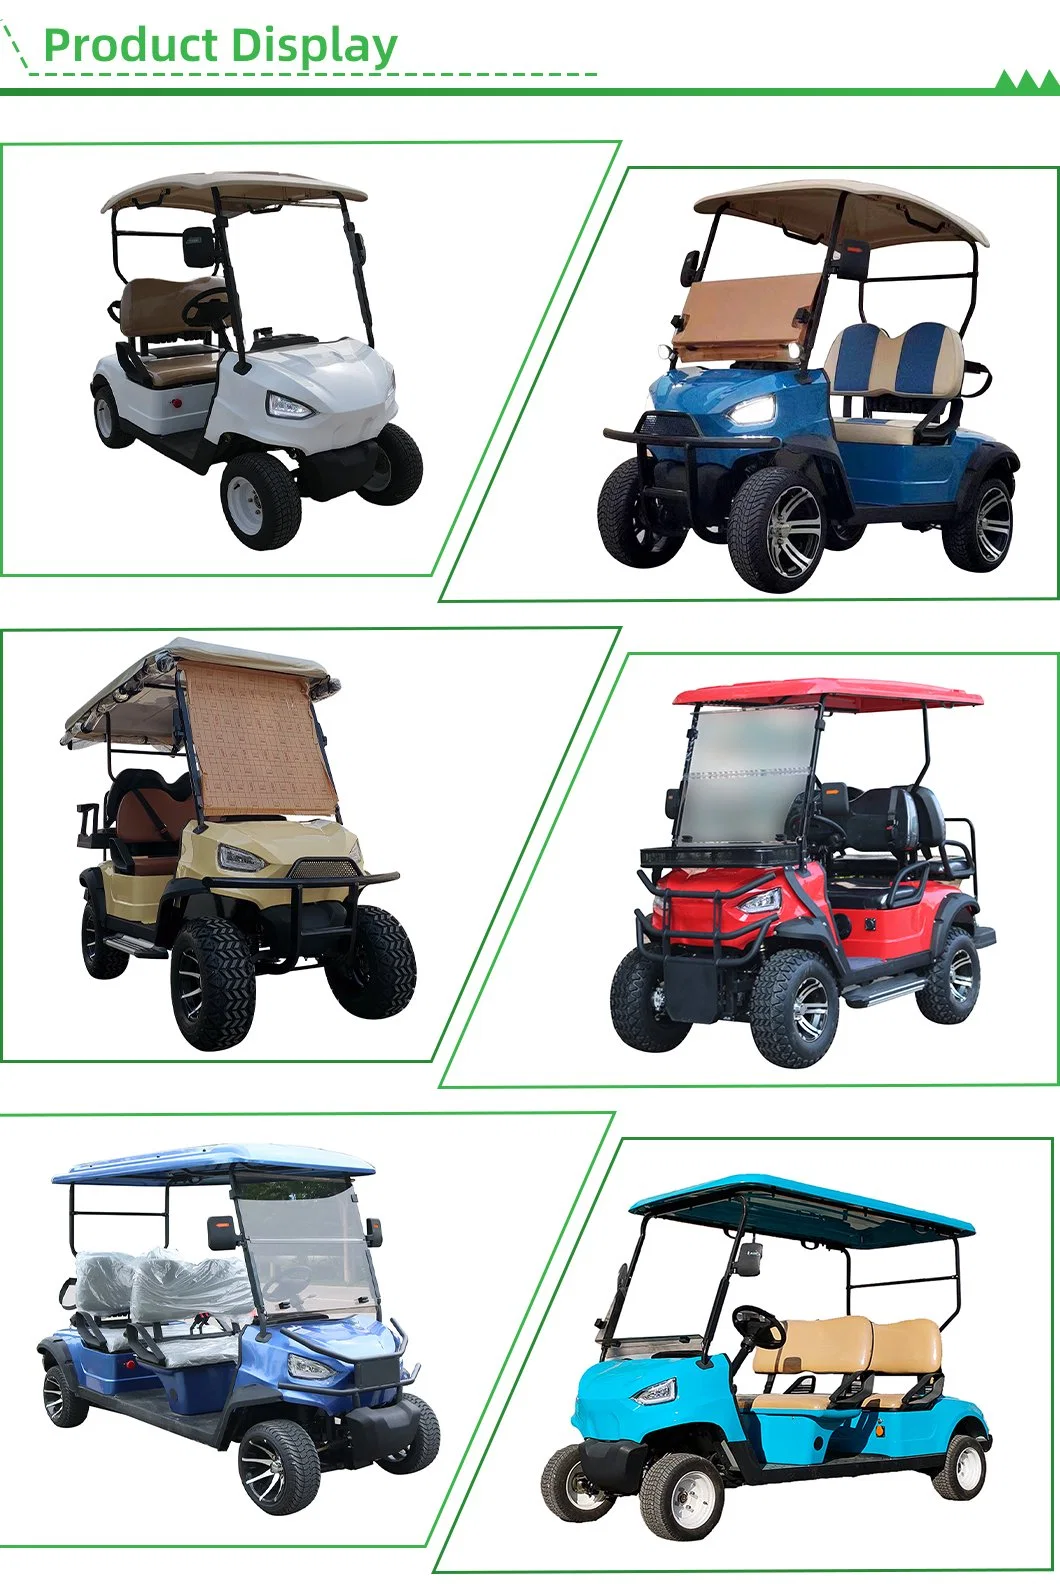 Hotel Sightseeing Utility 4 Person Electric Golf Cart Street Legal Hunting Golf Car